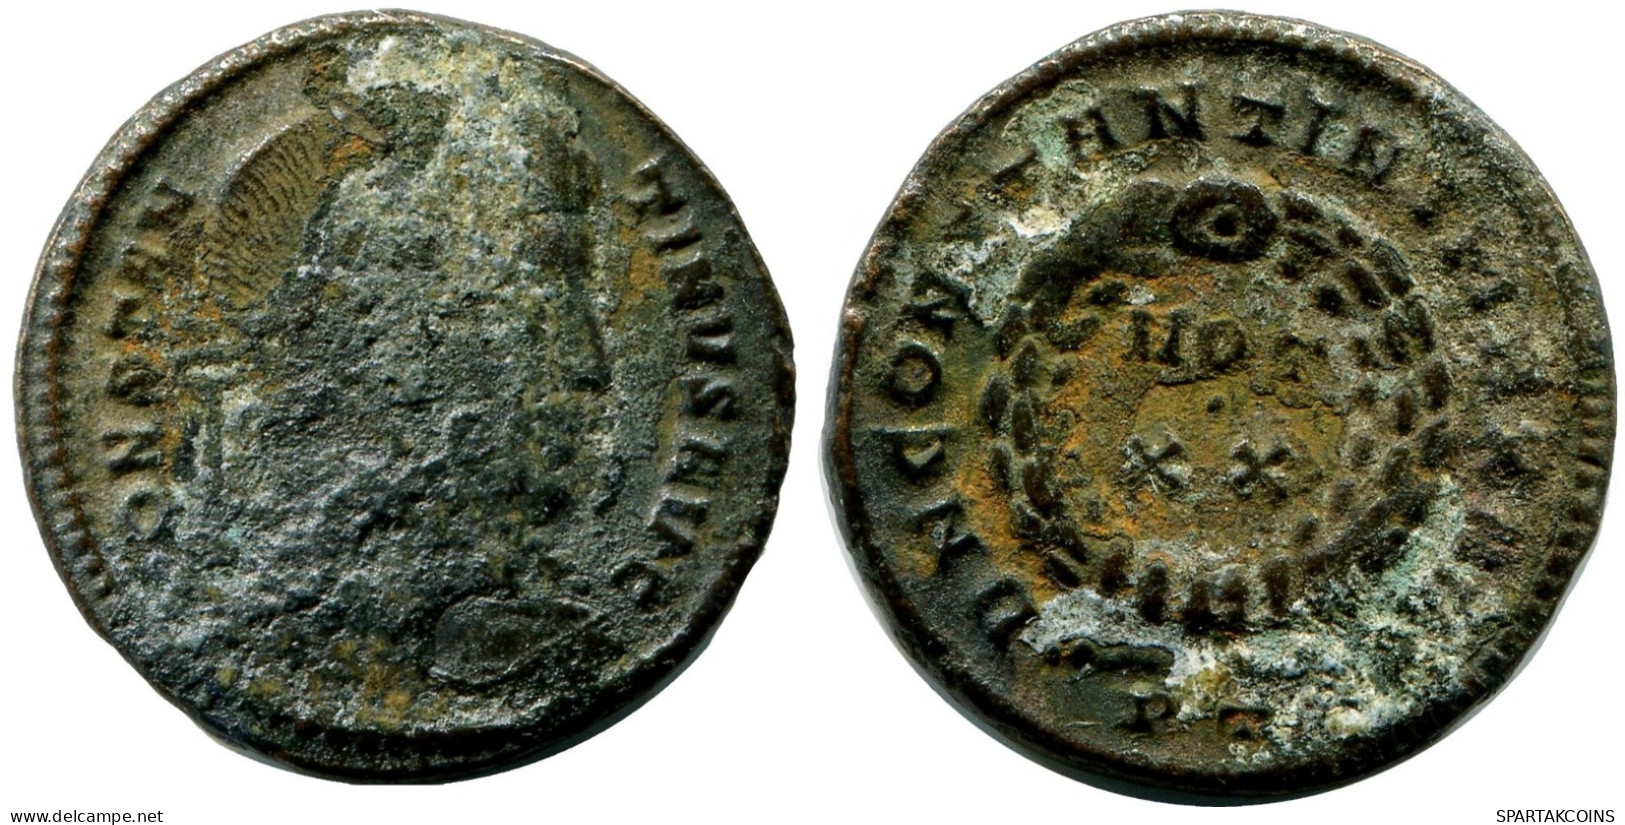 CONSTANTINE I MINTED IN TICINUM FROM THE ROYAL ONTARIO MUSEUM #ANC11083.14.D.A - El Imperio Christiano (307 / 363)